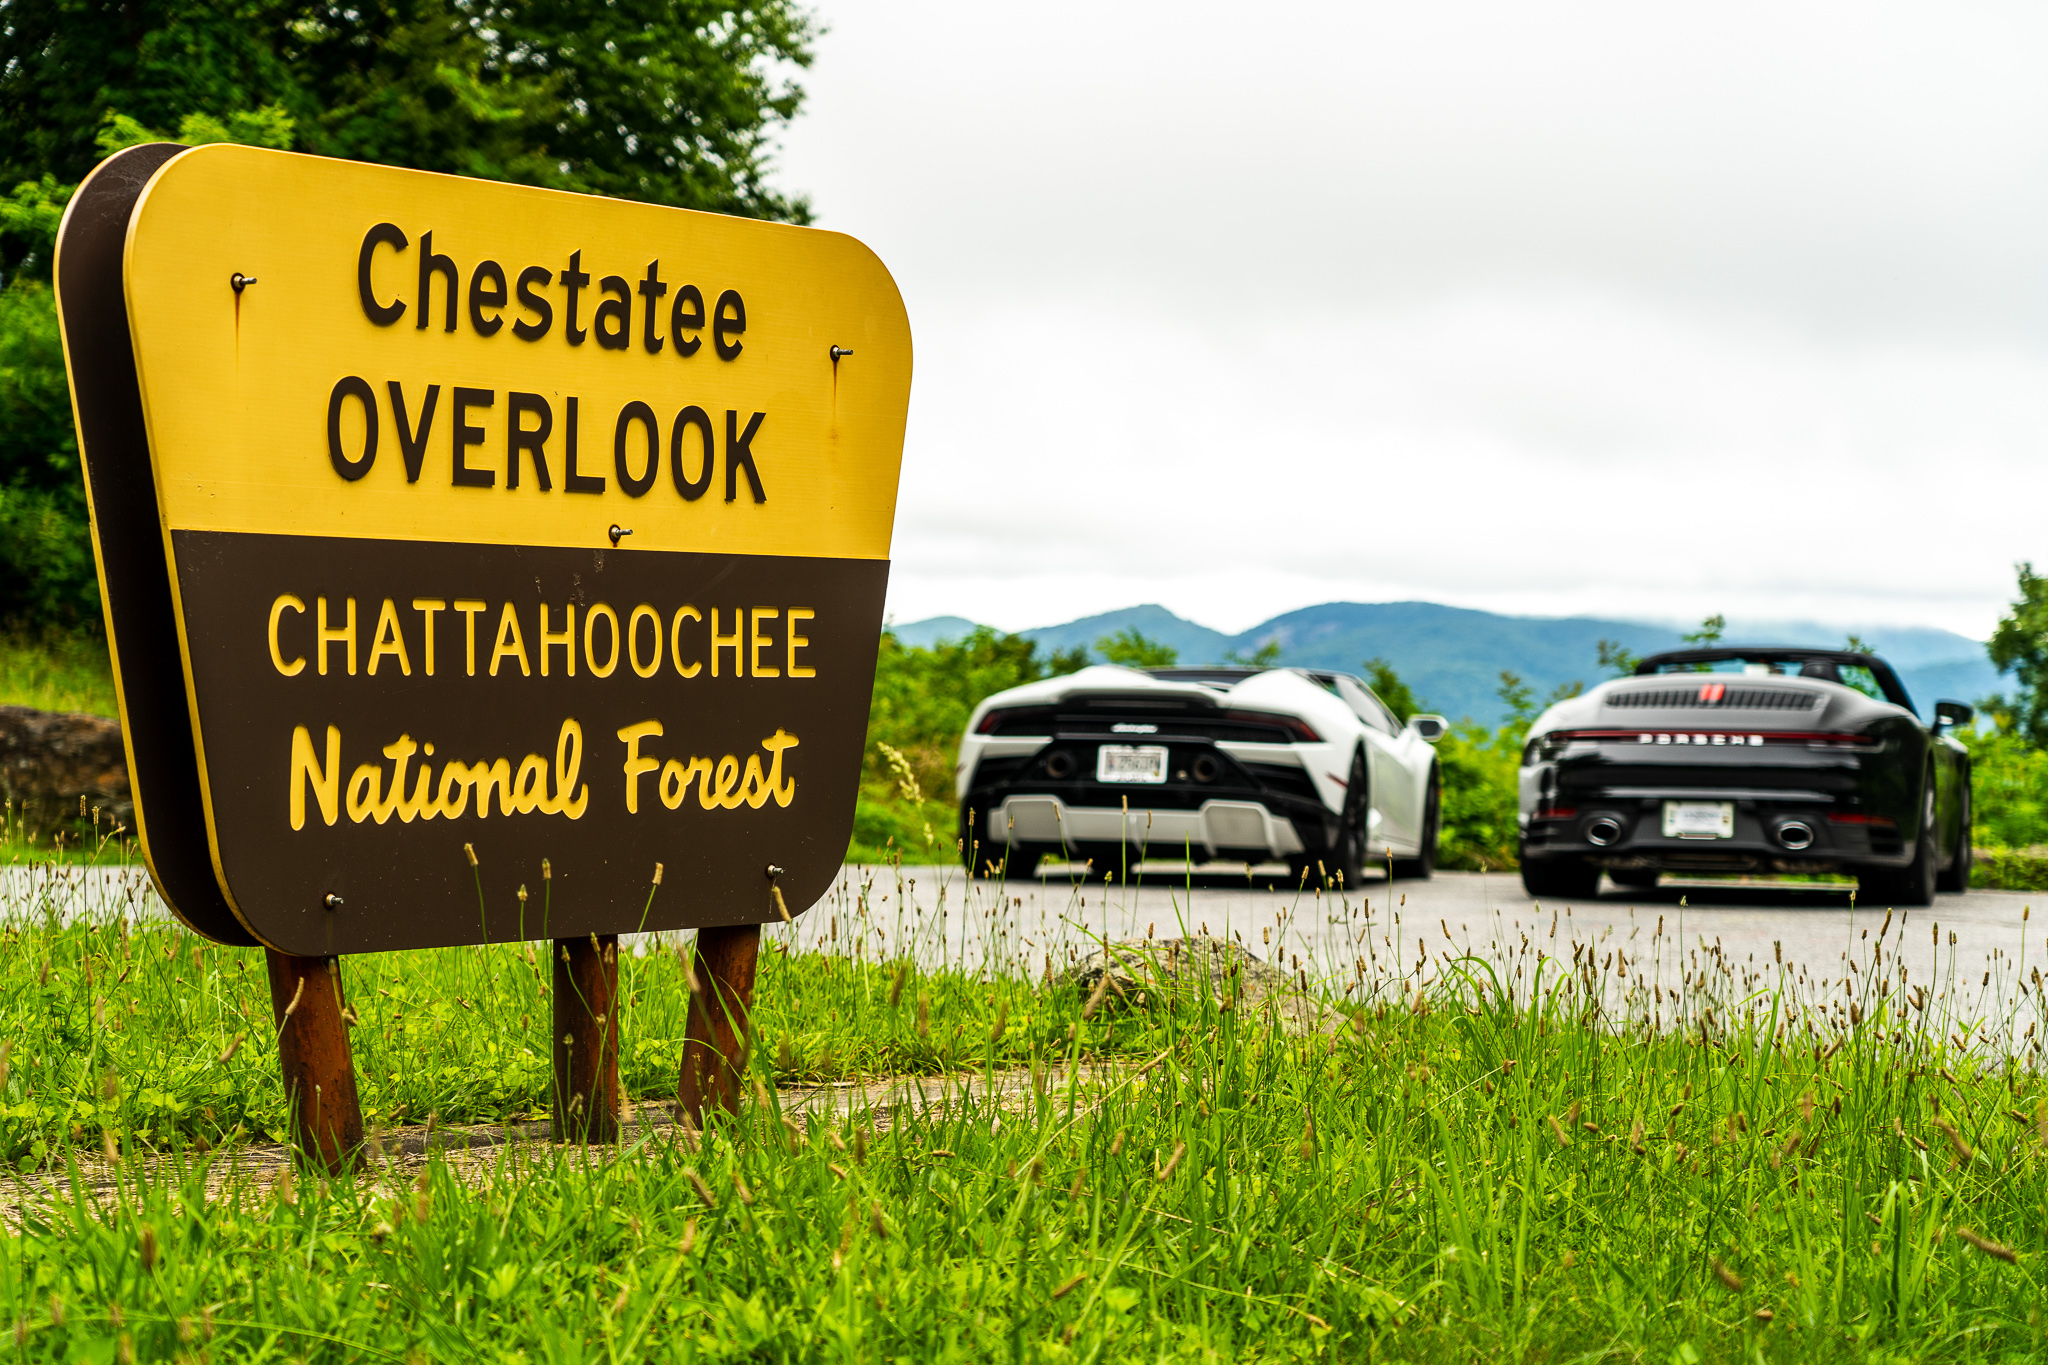 Two supercars in the Chattahoochee National Forest